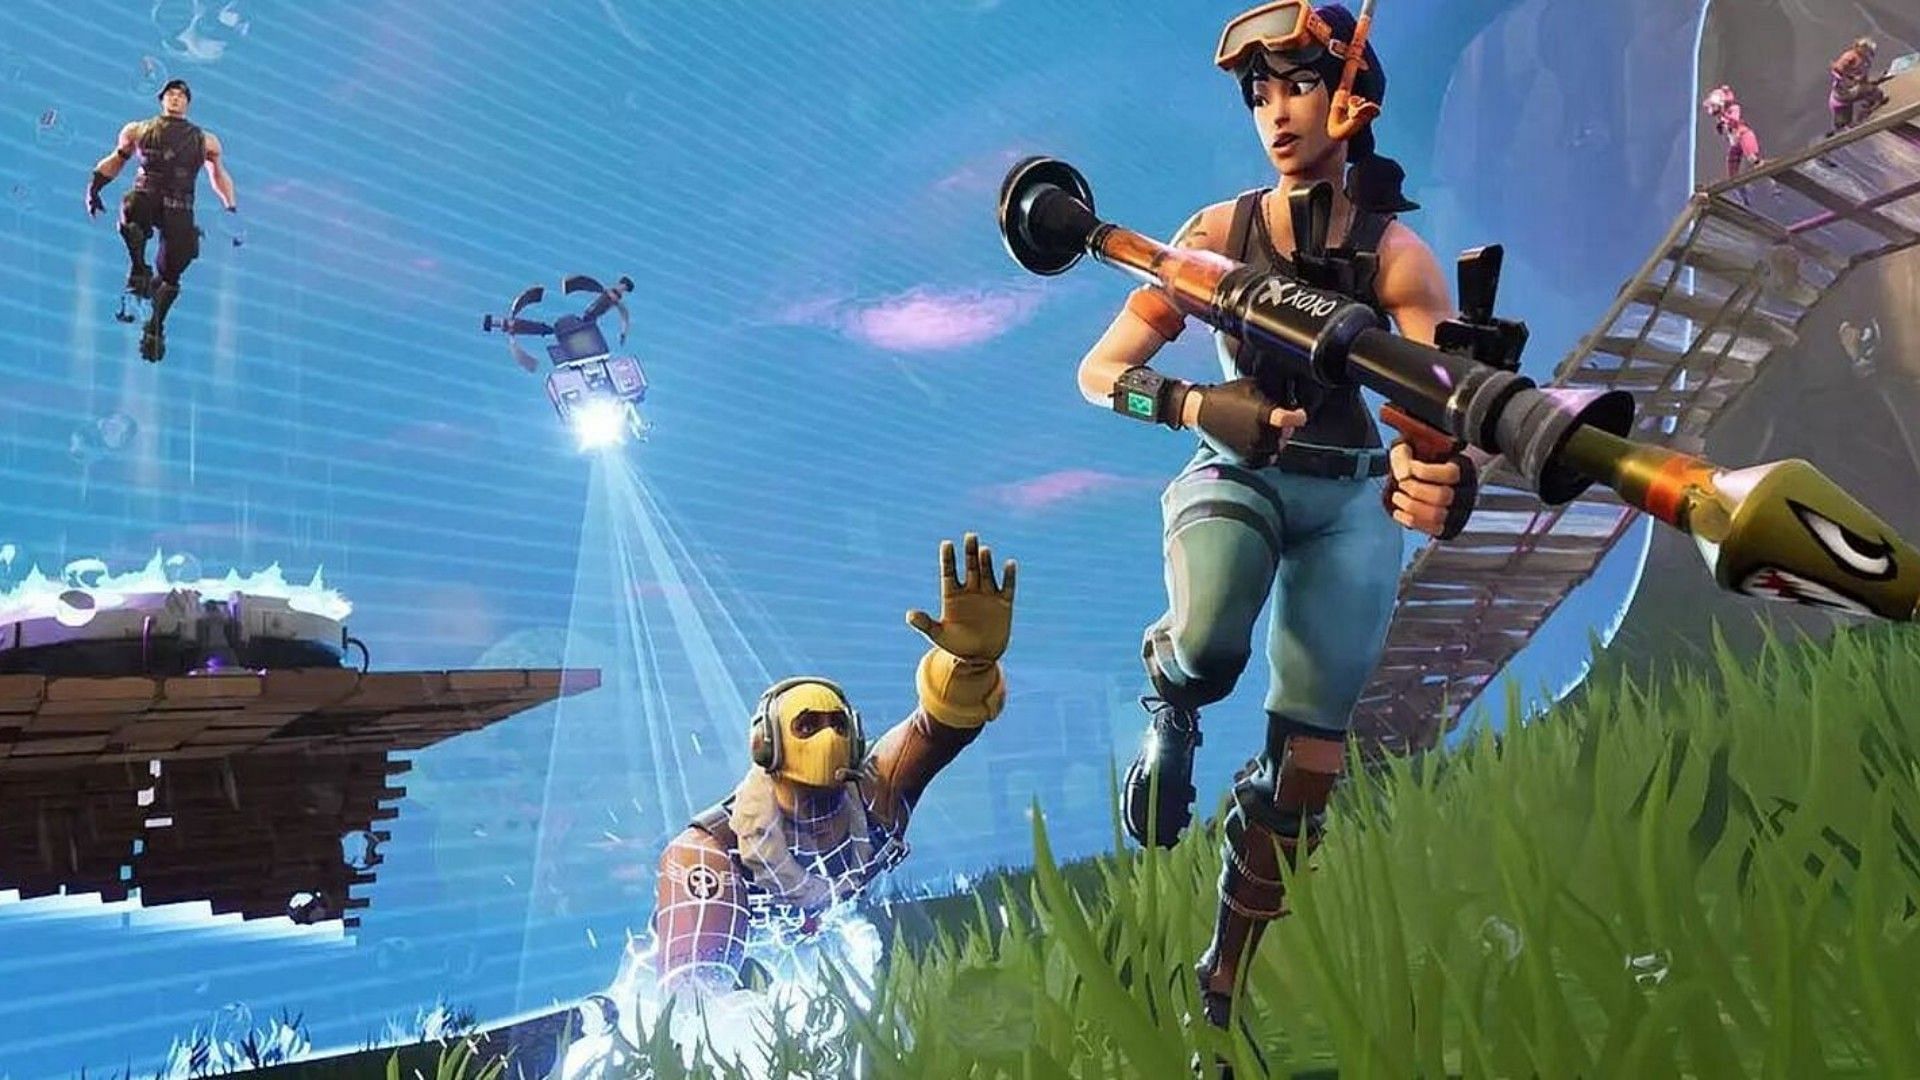 Knocked players can still inflict damage in Fortnite (Image via Epic Games)